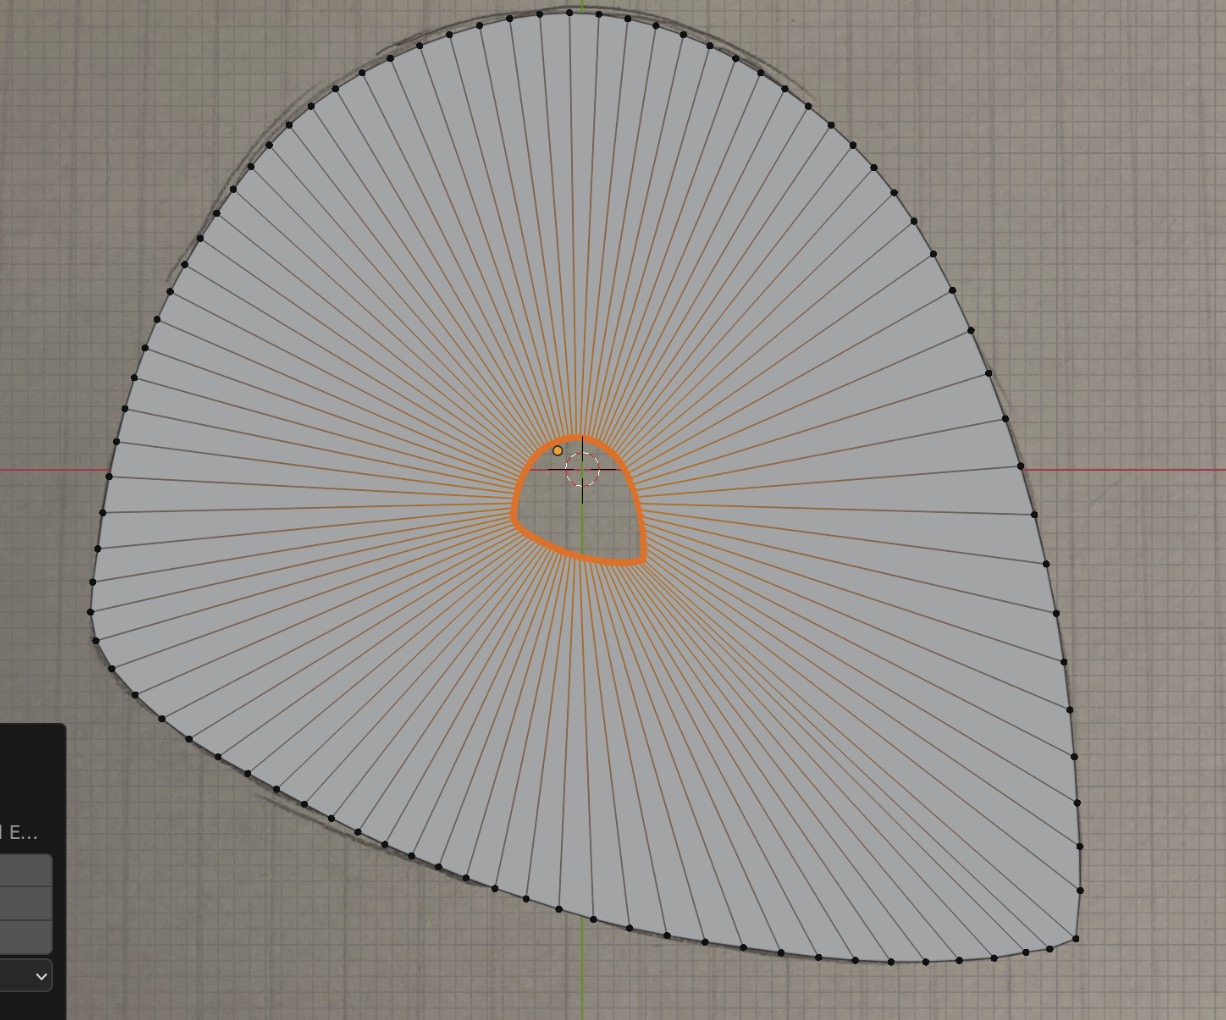 All verticies extruded, but the new points are scaled down inside the eye